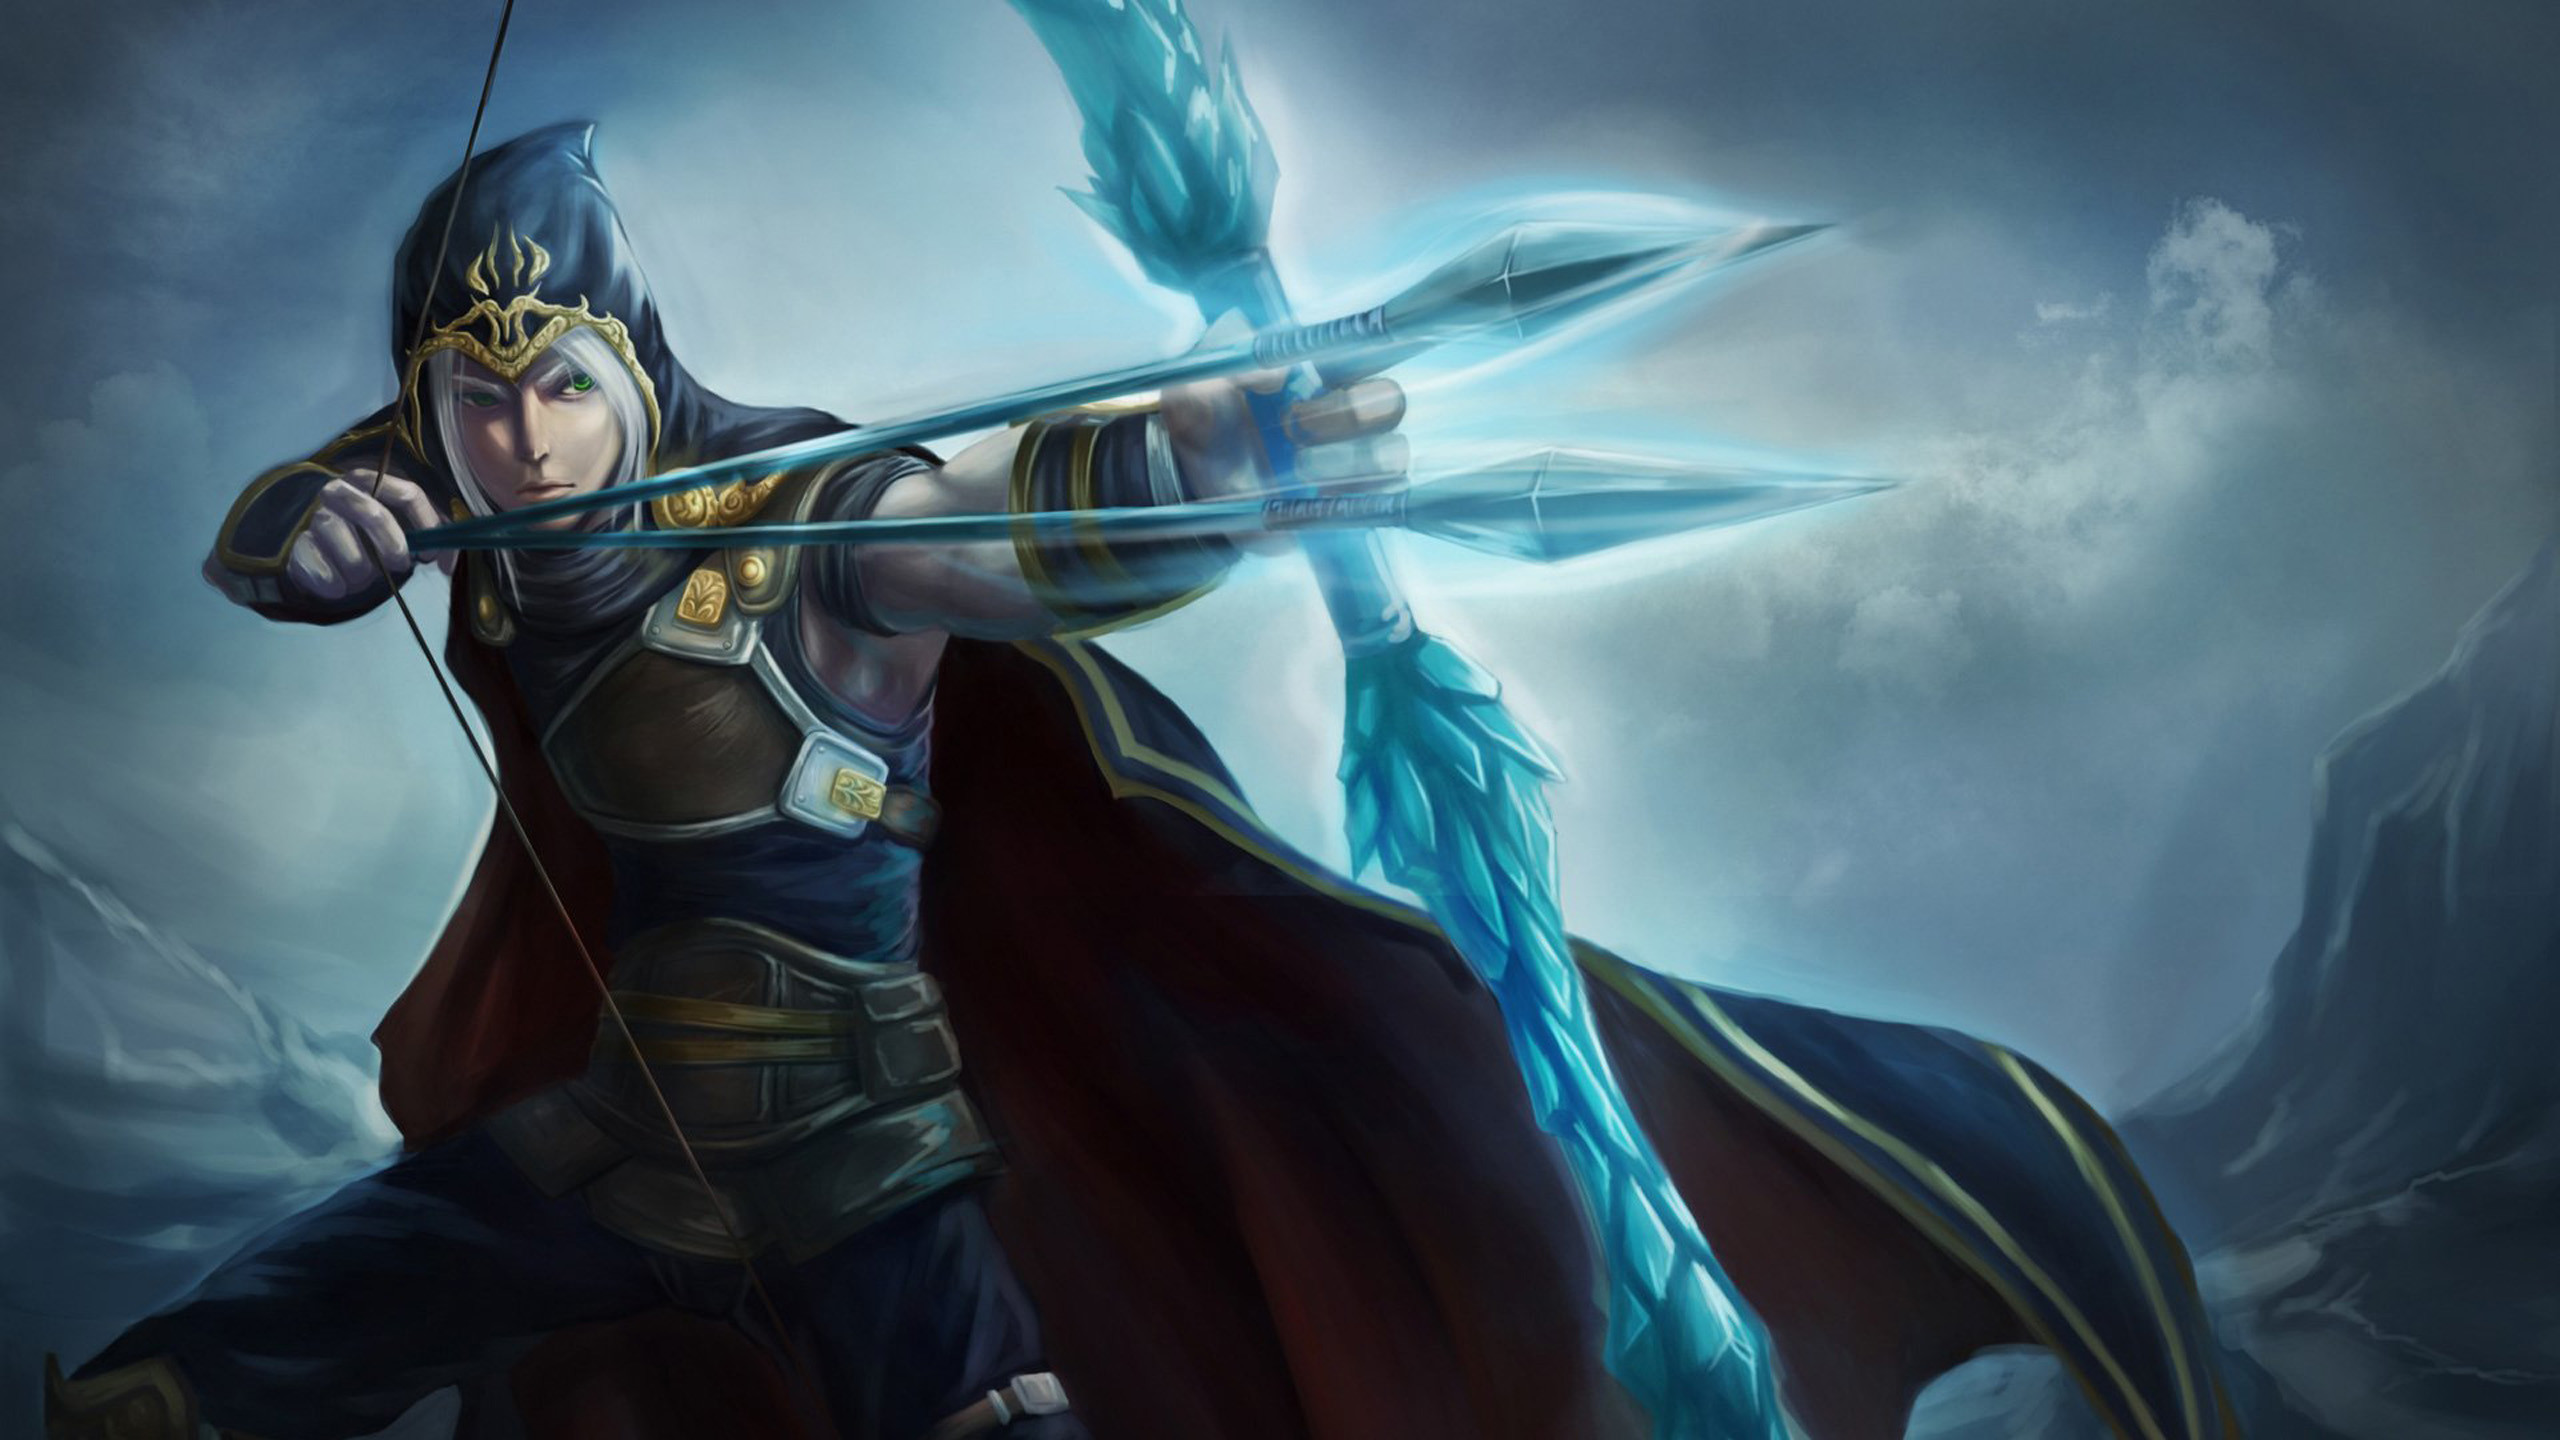 2560x1440 League Of Legends Ashe warrior archer weapon bow and arrow Full HD Wallpaper   : Wallpapers13.com